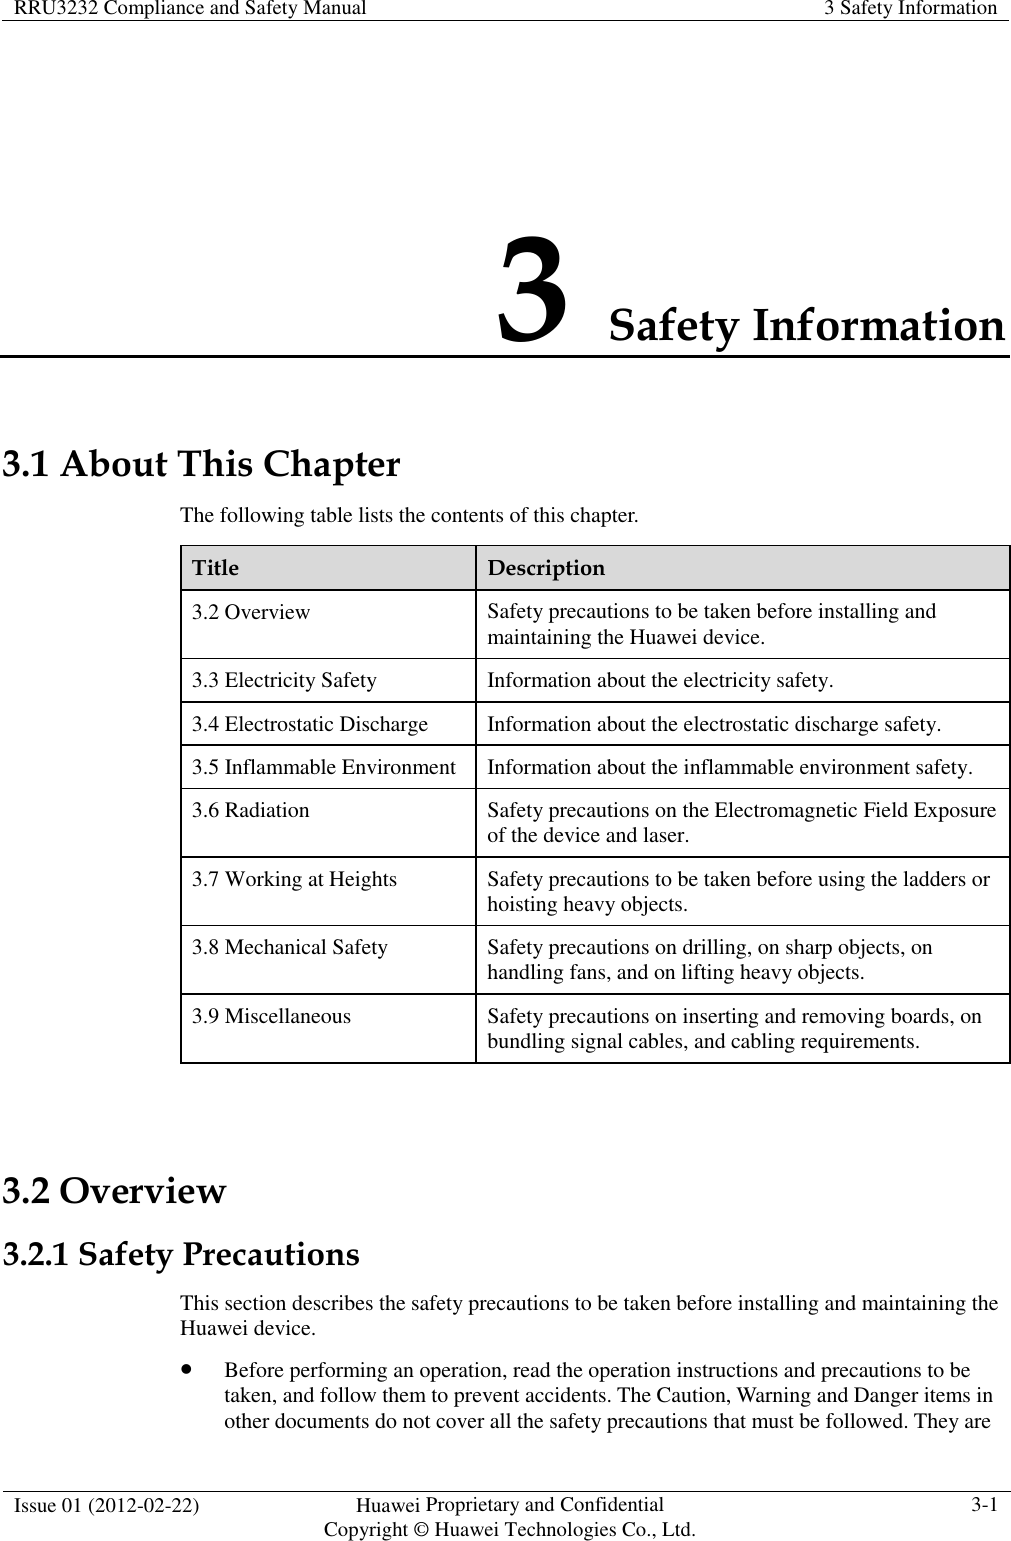 RRU3232 Compliance and Safety Manual  3 Safety Information  Issue 01 (2012-02-22)  Huawei Proprietary and Confidential           Copyright © Huawei Technologies Co., Ltd. 3-1  3 Safety Information 3.1 About This Chapter The following table lists the contents of this chapter. Title  Description 3.2 Overview  Safety precautions to be taken before installing and maintaining the Huawei device. 3.3 Electricity Safety  Information about the electricity safety. 3.4 Electrostatic Discharge  Information about the electrostatic discharge safety. 3.5 Inflammable Environment  Information about the inflammable environment safety. 3.6 Radiation  Safety precautions on the Electromagnetic Field Exposure of the device and laser. 3.7 Working at Heights  Safety precautions to be taken before using the ladders or hoisting heavy objects. 3.8 Mechanical Safety  Safety precautions on drilling, on sharp objects, on handling fans, and on lifting heavy objects. 3.9 Miscellaneous  Safety precautions on inserting and removing boards, on bundling signal cables, and cabling requirements.  3.2 Overview 3.2.1 Safety Precautions This section describes the safety precautions to be taken before installing and maintaining the Huawei device.  Before performing an operation, read the operation instructions and precautions to be taken, and follow them to prevent accidents. The Caution, Warning and Danger items in other documents do not cover all the safety precautions that must be followed. They are 